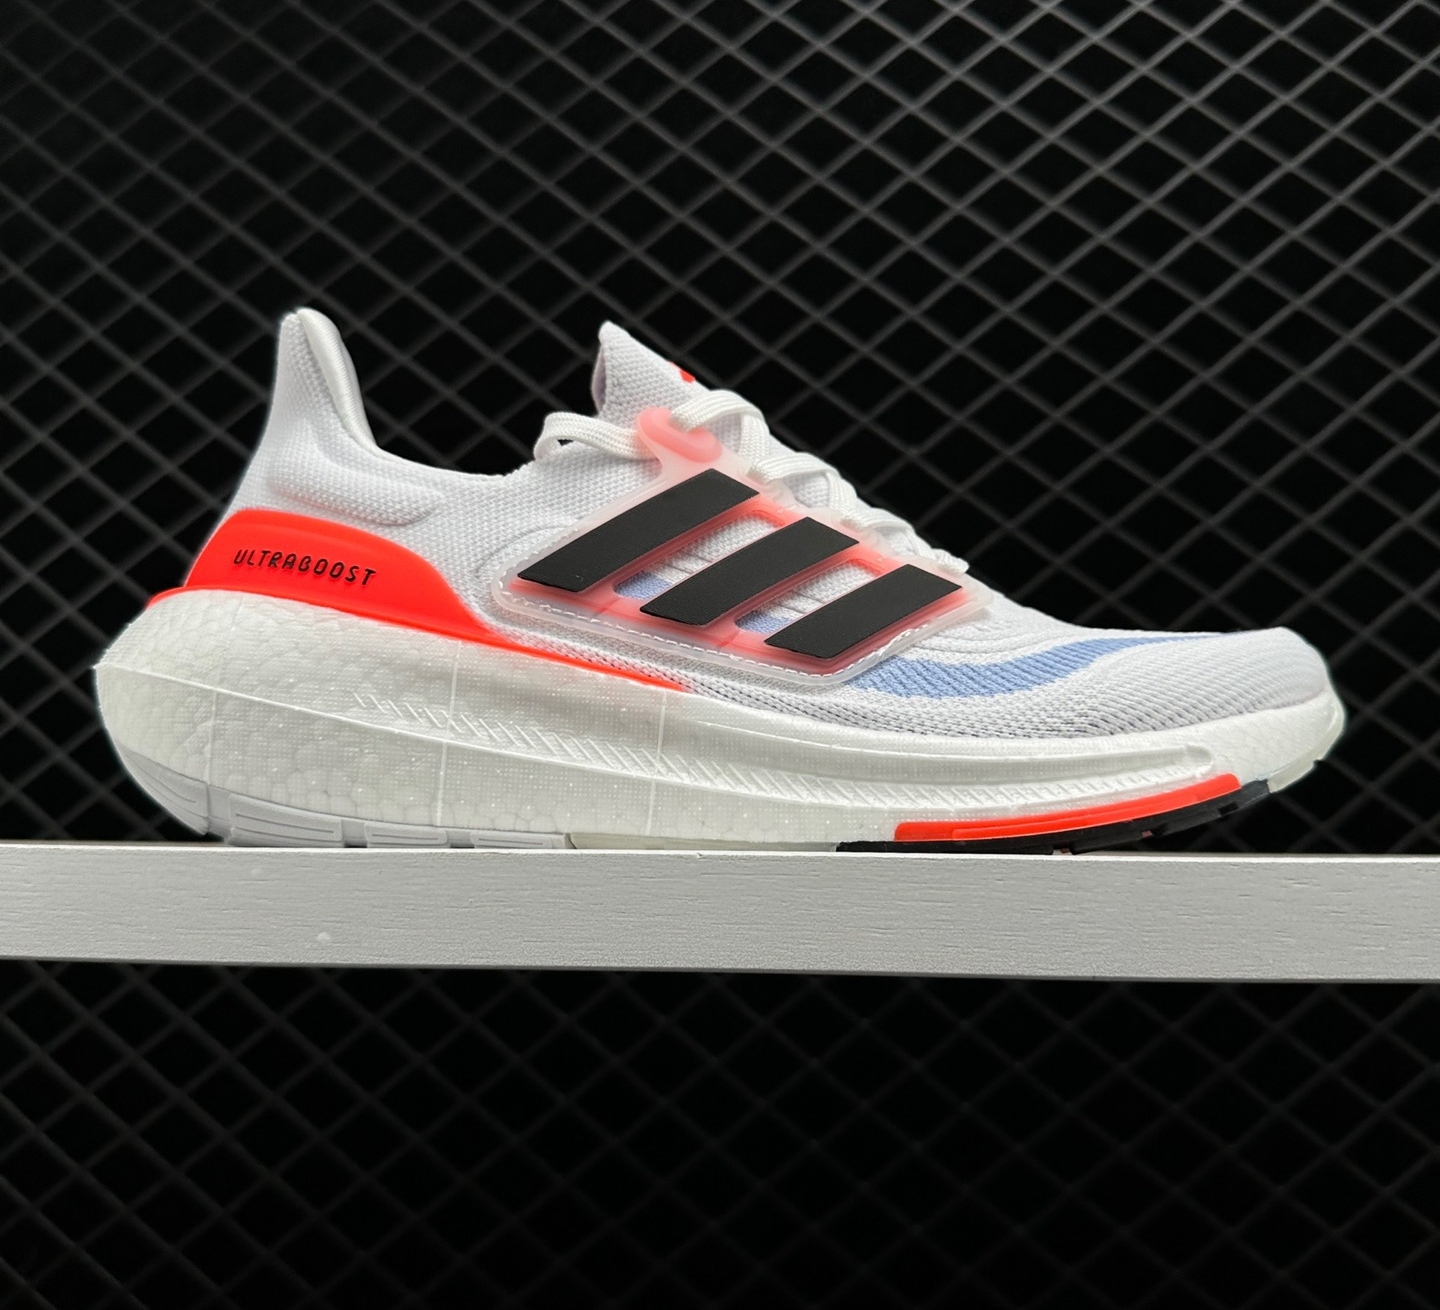 Adidas Ultra Boost Light White Black Solar Red - HQ6351: Performance and Style with Superior Comfort